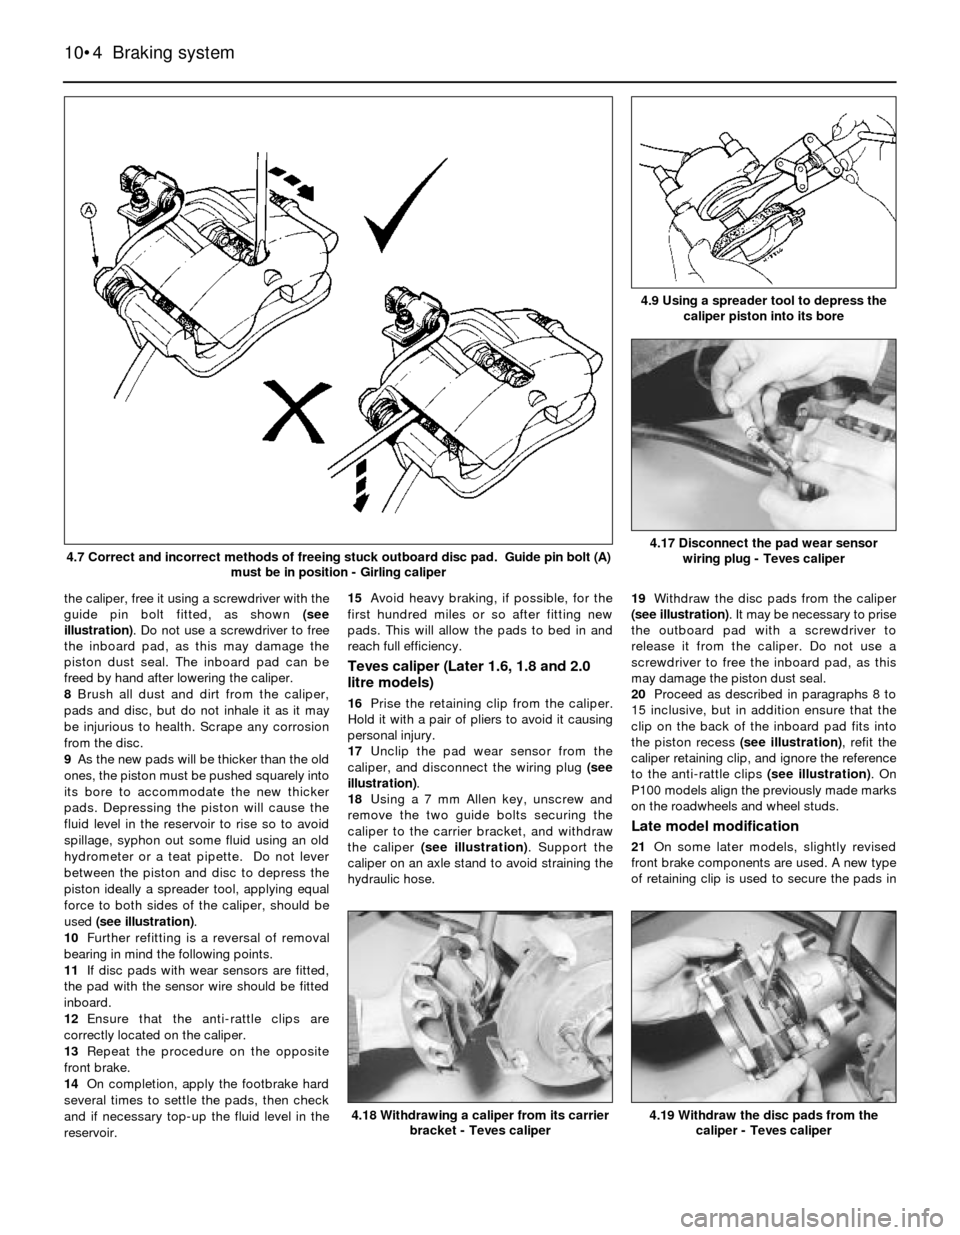 FORD SIERRA 1988 2.G Braking System Workshop Manual the caliper, free it using a screwdriver with the
guide pin bolt fitted, as shown (see
illustration). Do not use a screwdriver to free
the inboard pad, as this may damage the
piston dust seal. The inb